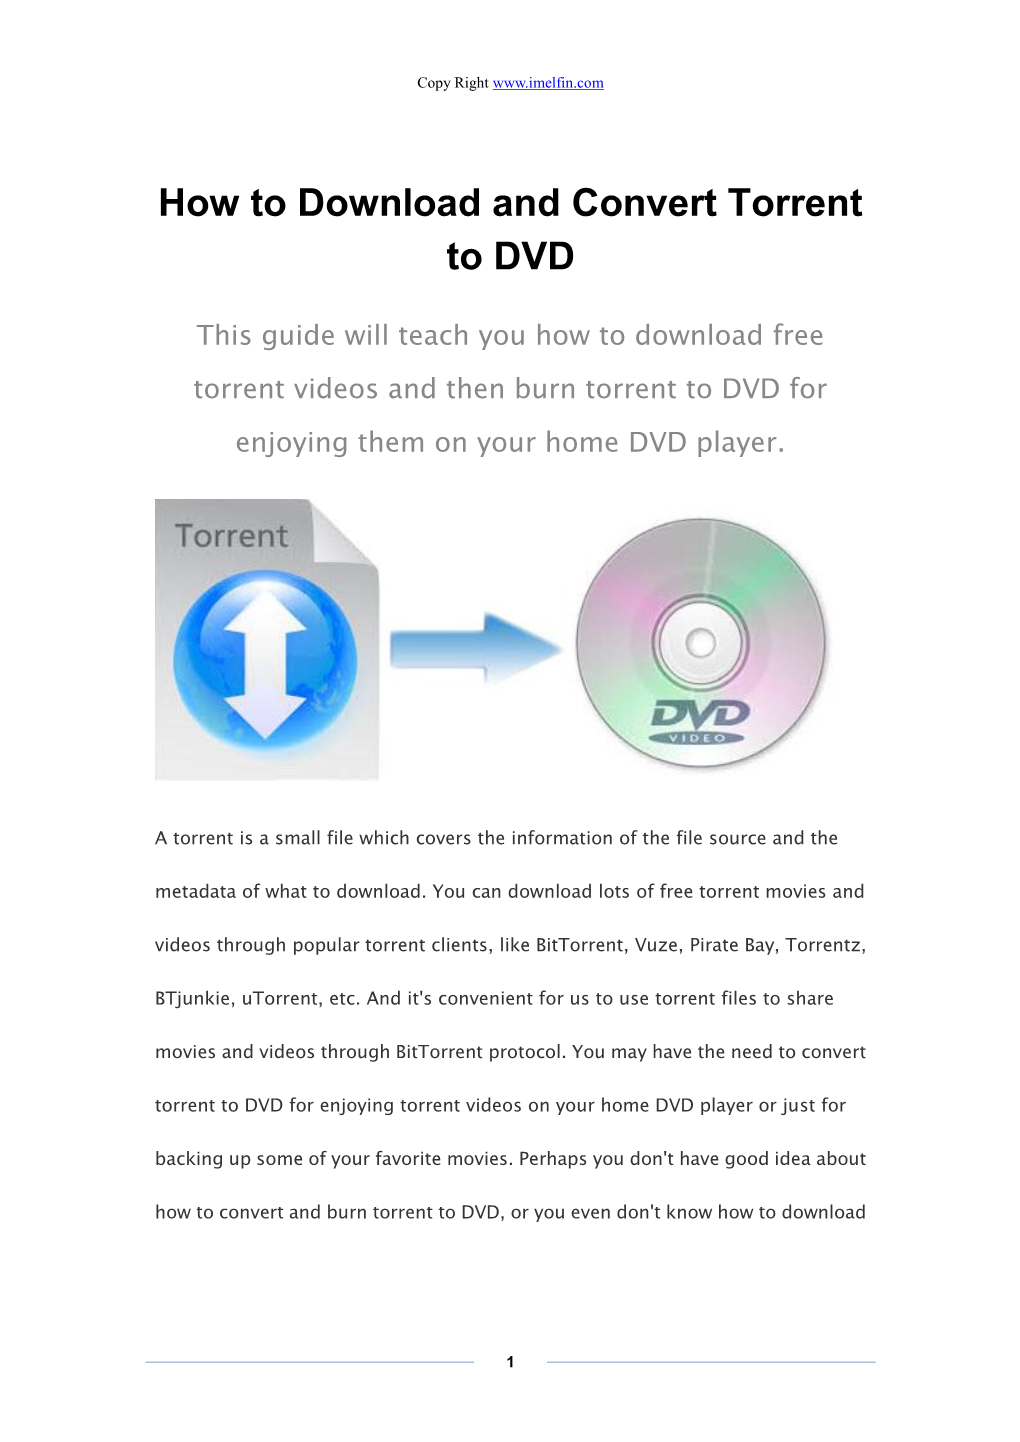 How to Download and Convert Torrent to DVD